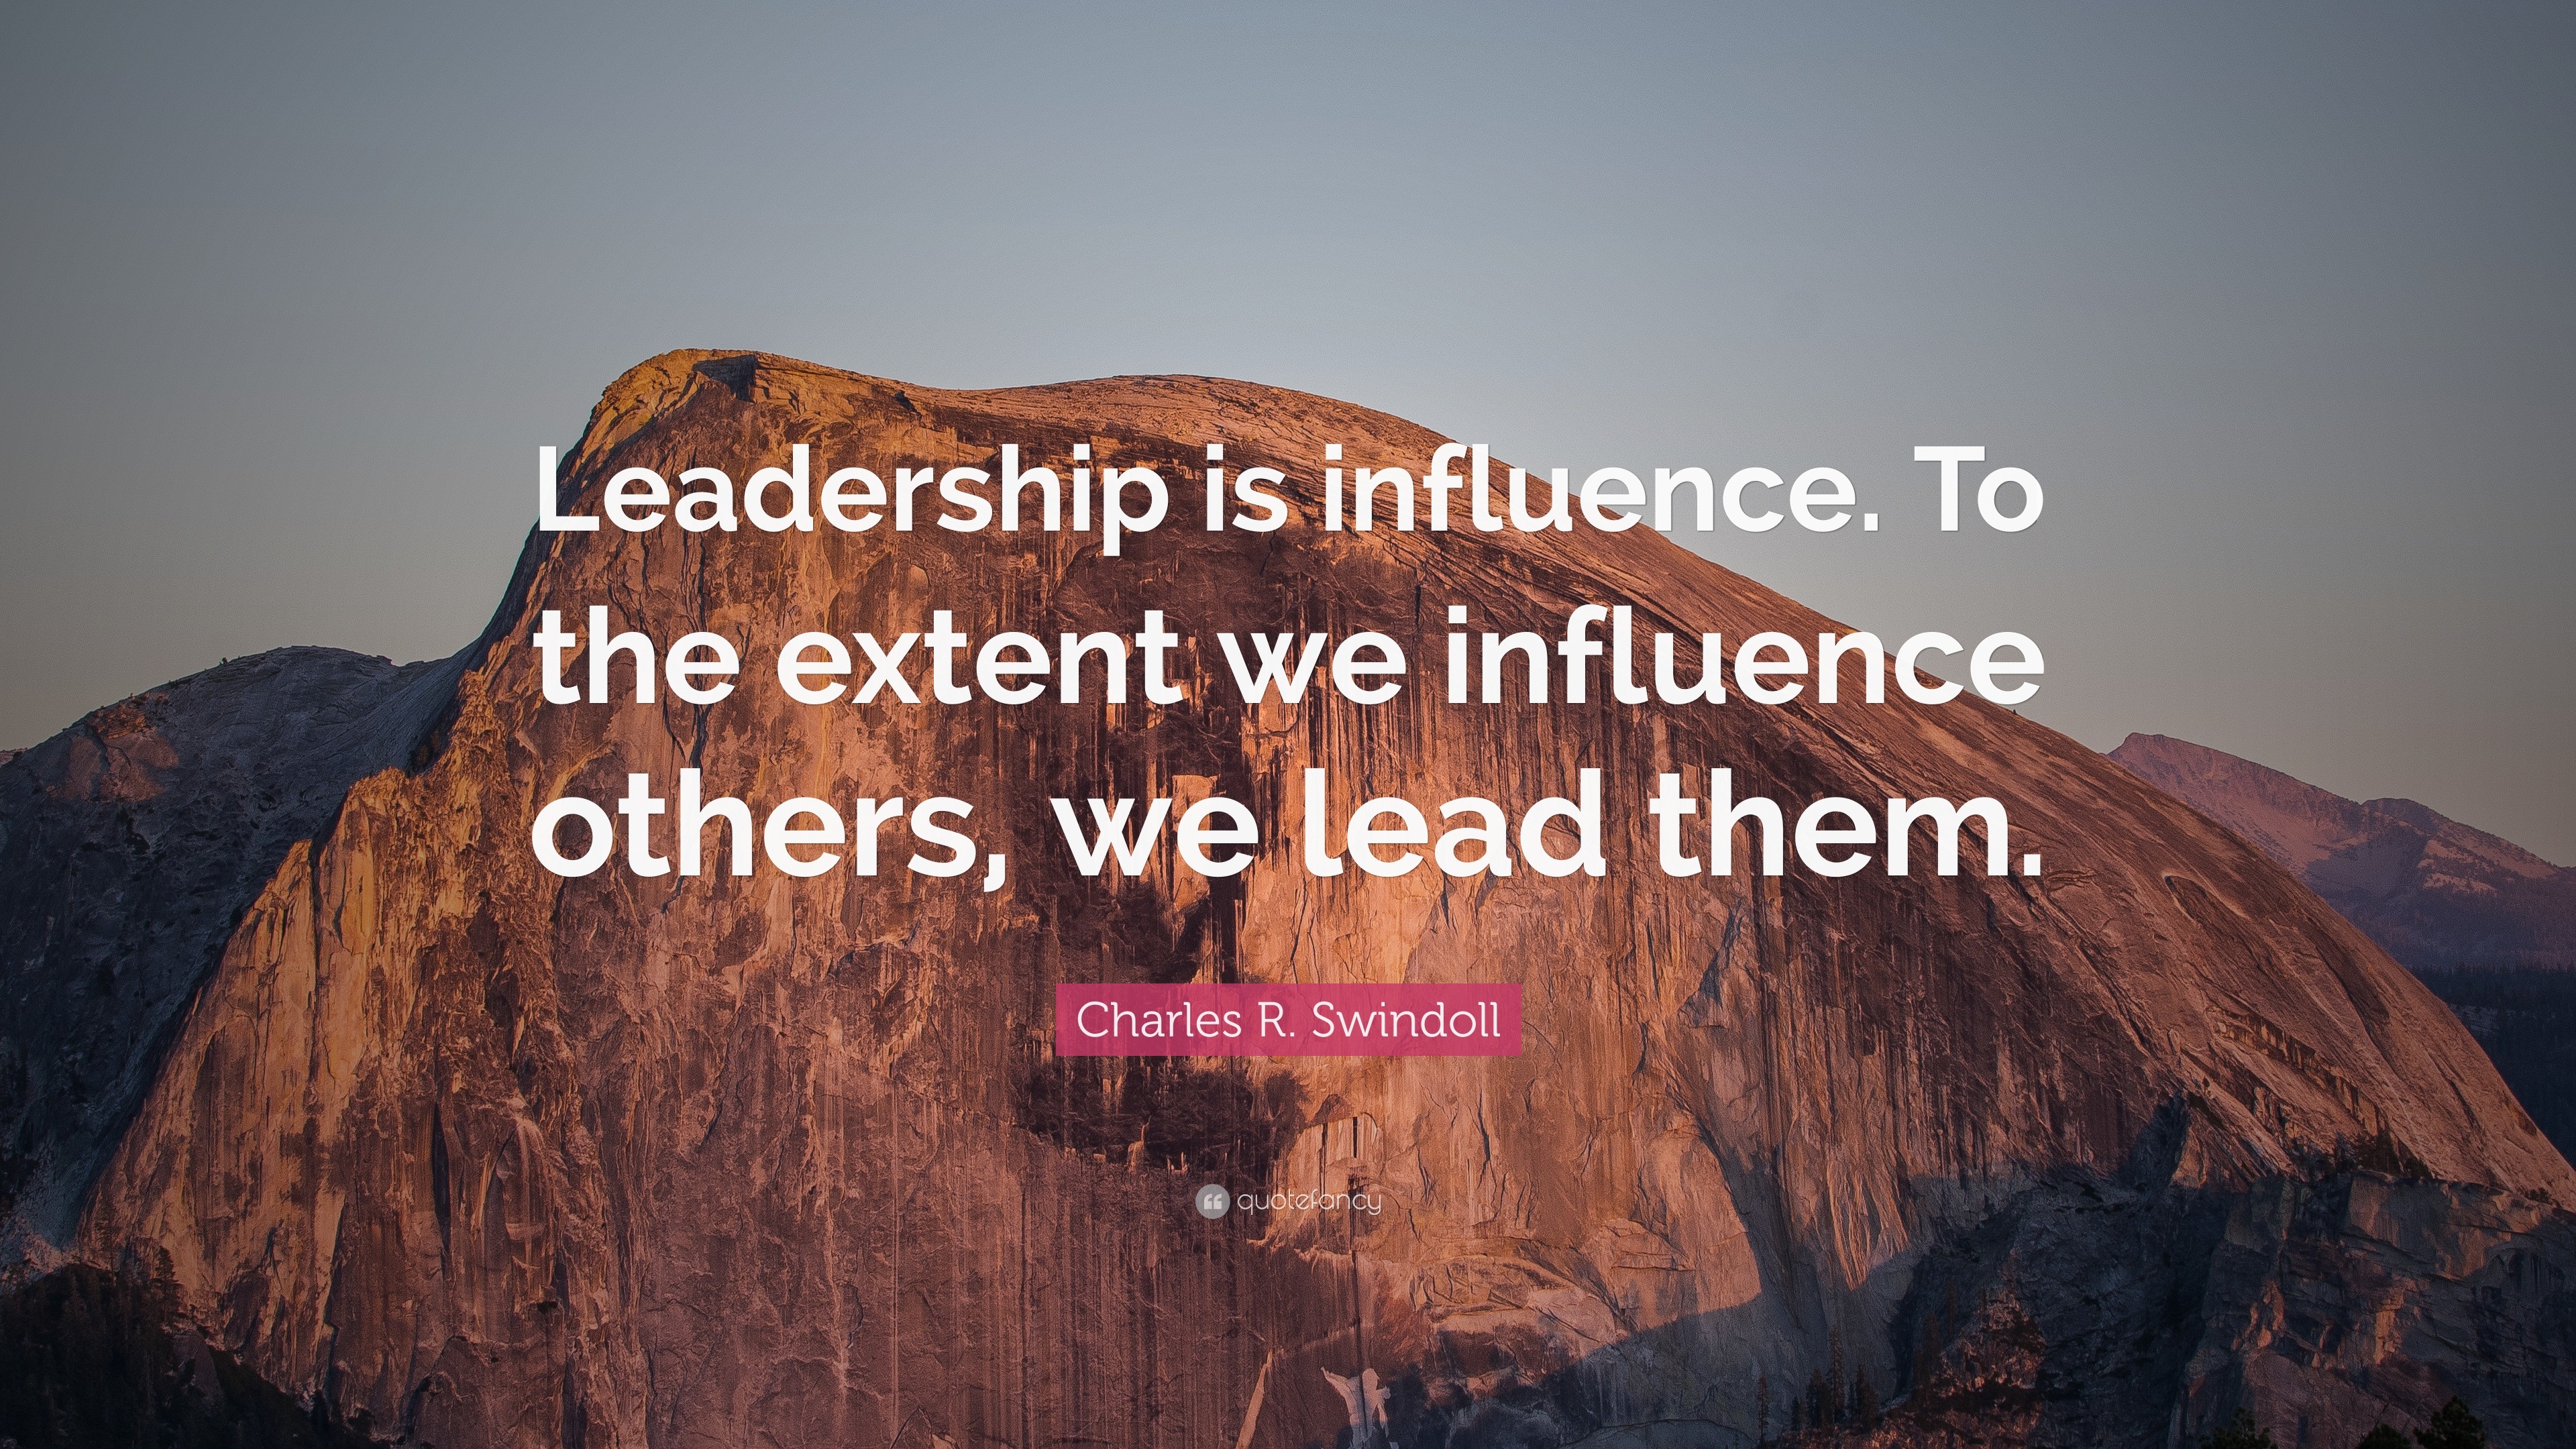 1947973 Charles R Swindoll Quote Leadership is influence To the extent we